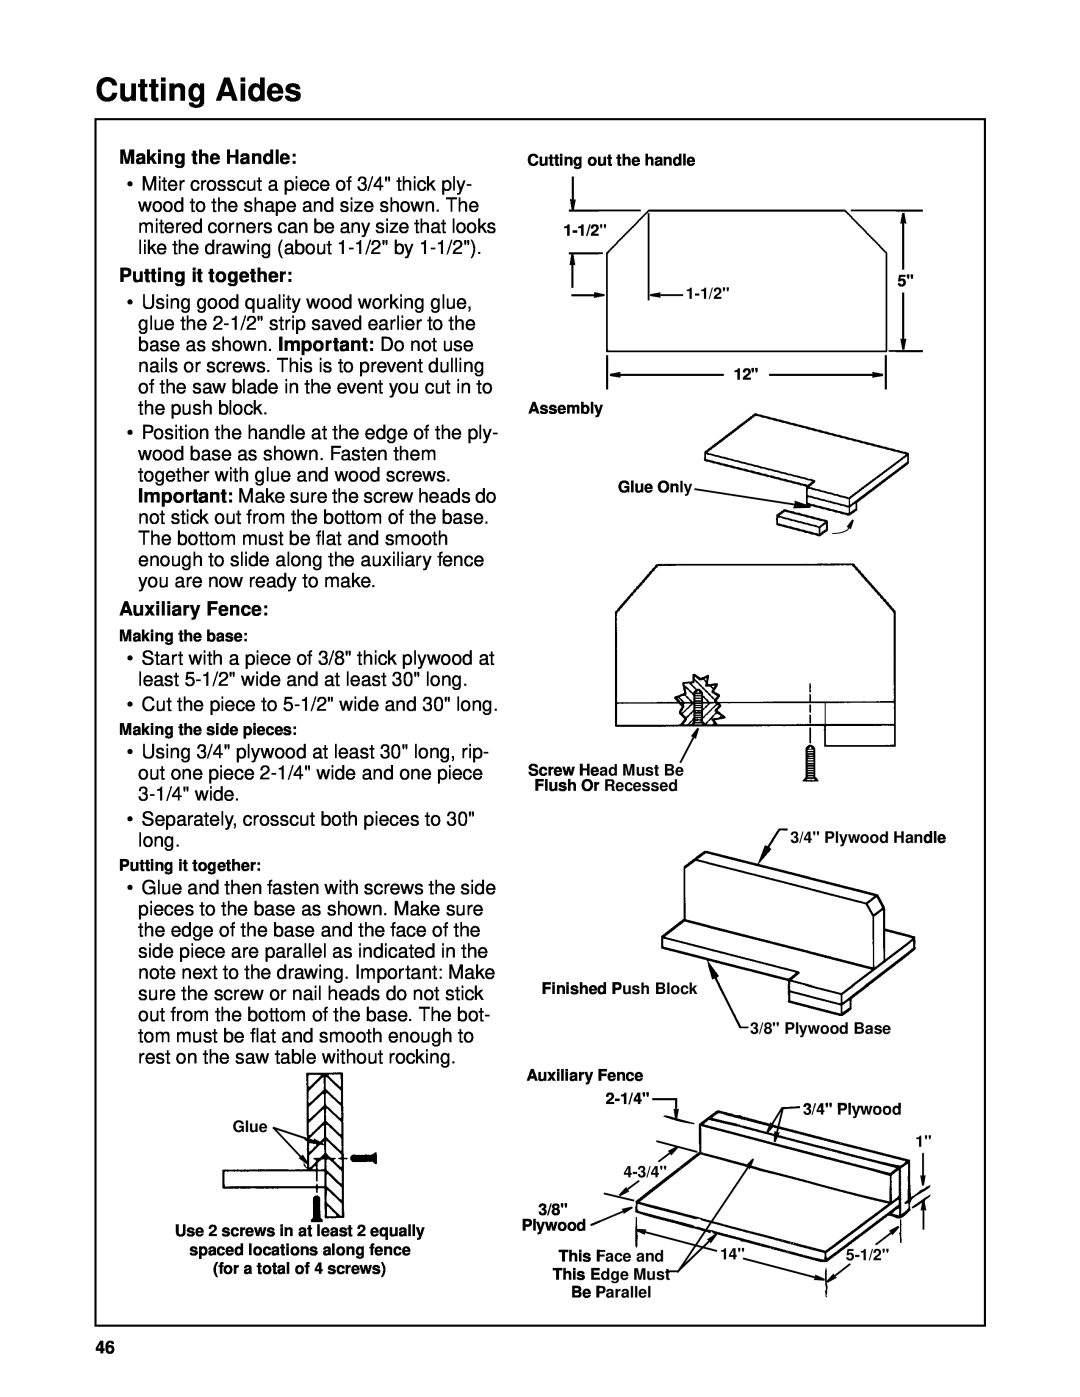 Craftsman 509399, 509398 owner manual Cutting Aides, Making the Handle, Putting it together, Auxiliary Fence 